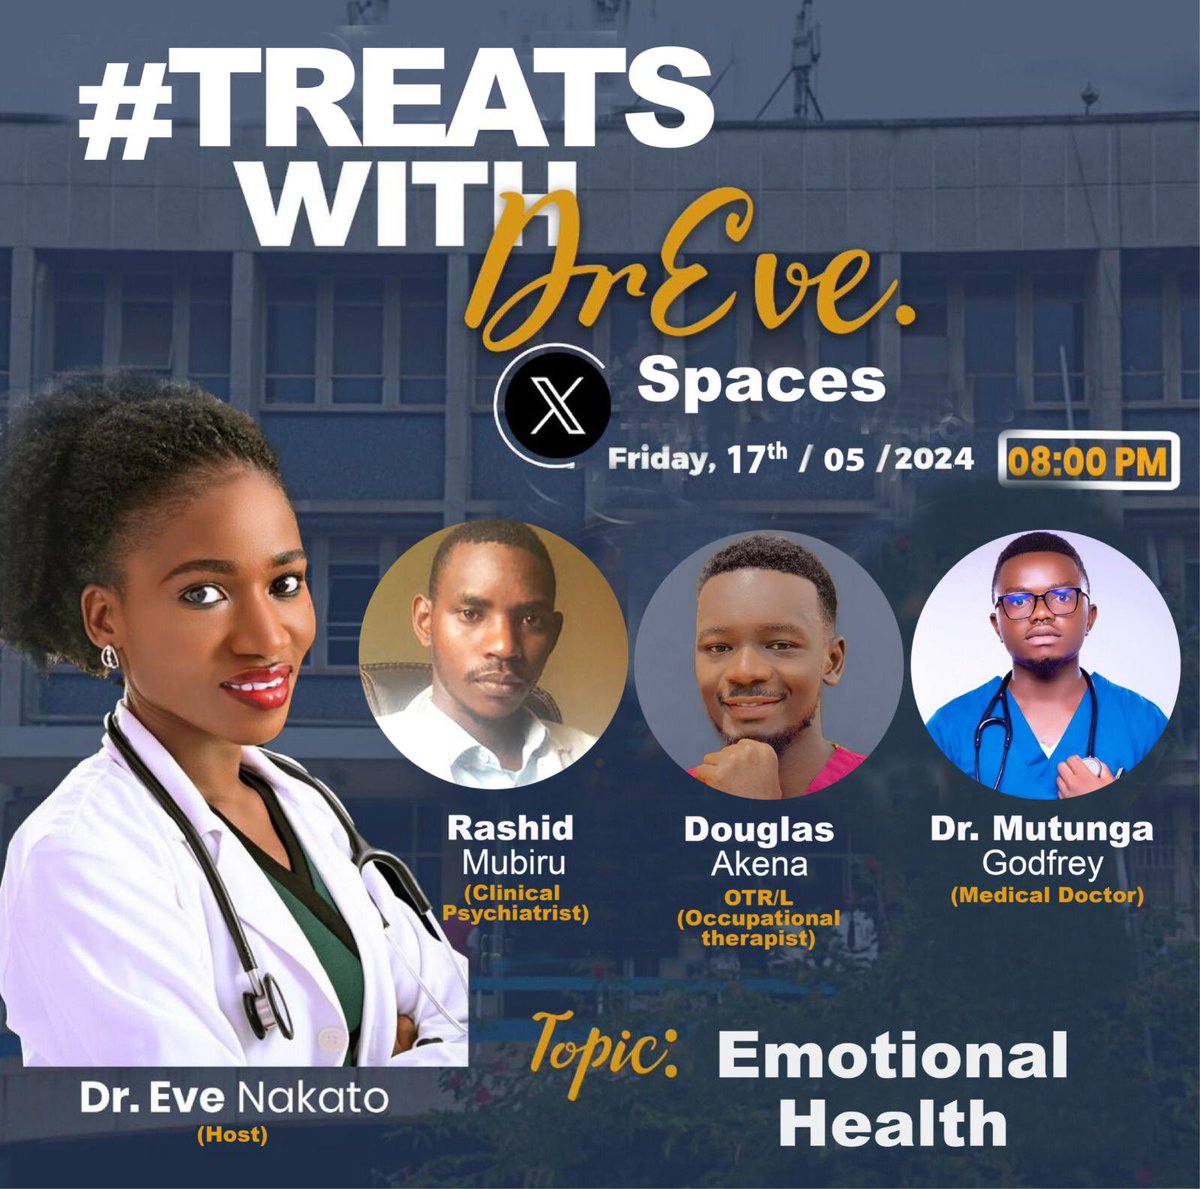 This week on Friday, I will be hosted together with another team of awesome speakers to talk about emotional health. What do you know about mental health? Come and share with us on Friday at 20.00 hours. See y’all there 😊🎶☕️